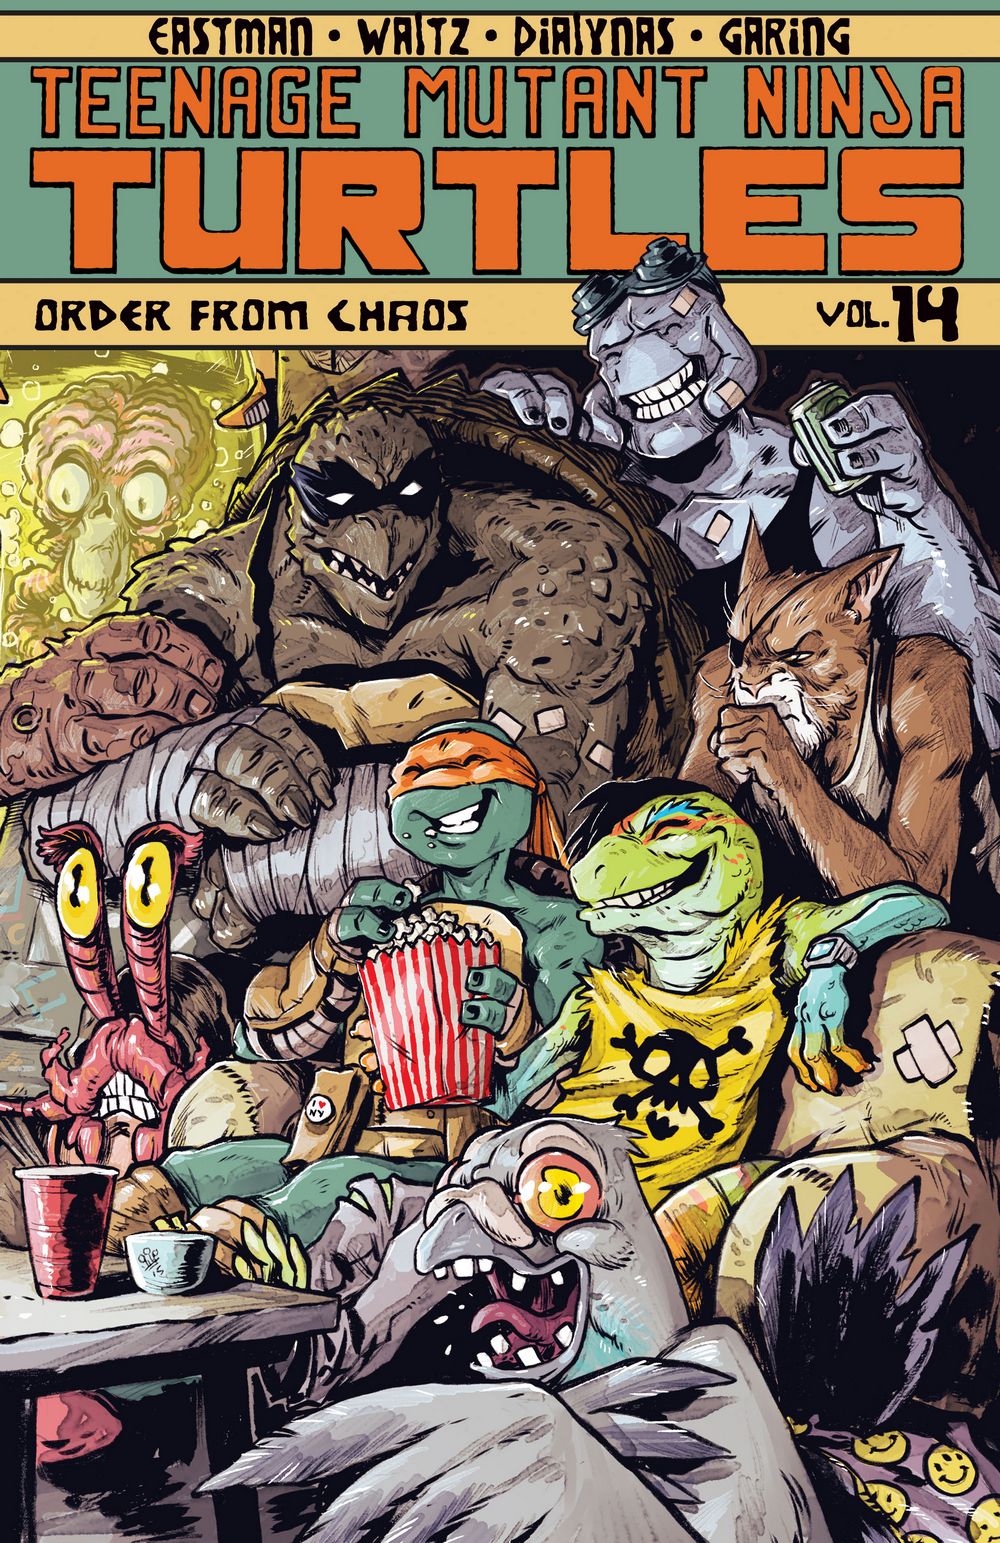 Teenage Mutant Ninja Turtles Ongoing TP VOL 14 Order From Chaos